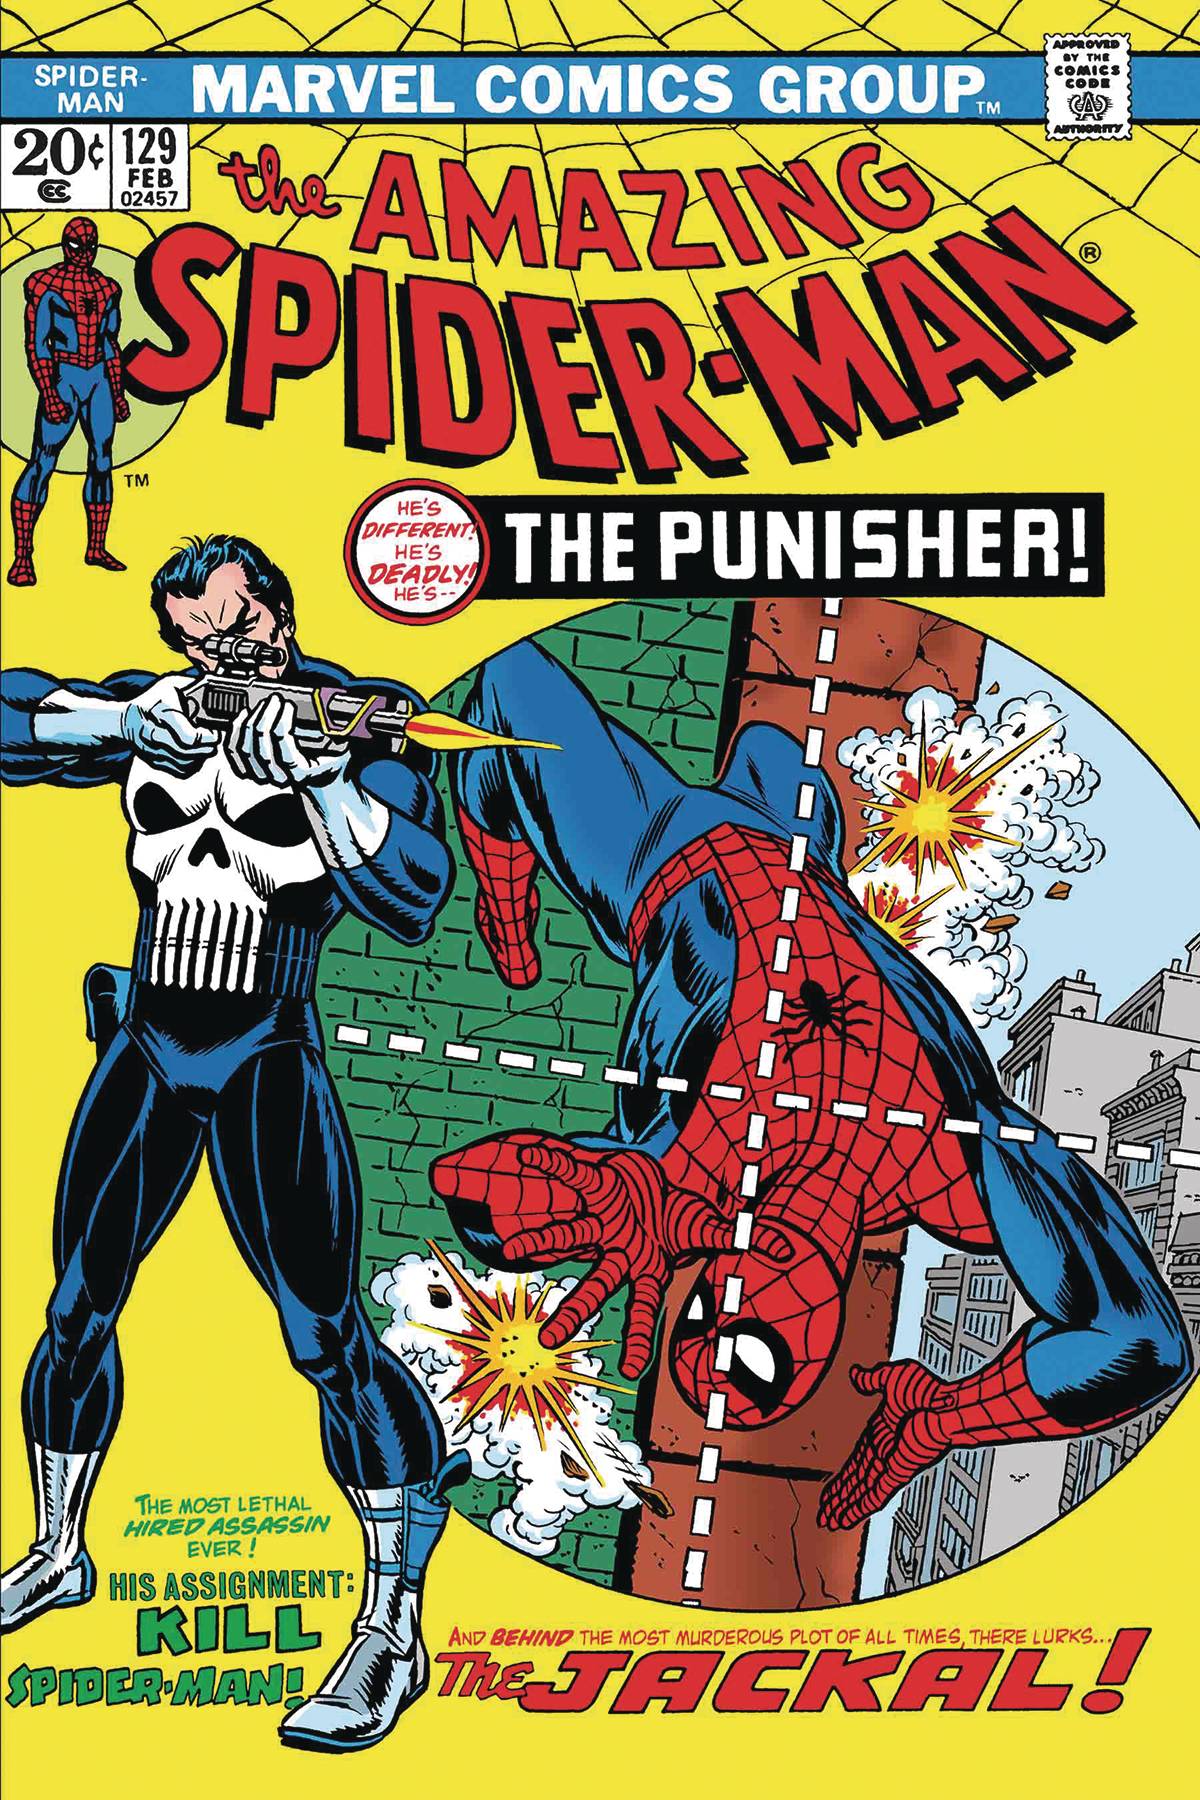 True Believers Punisher First Appearance #1